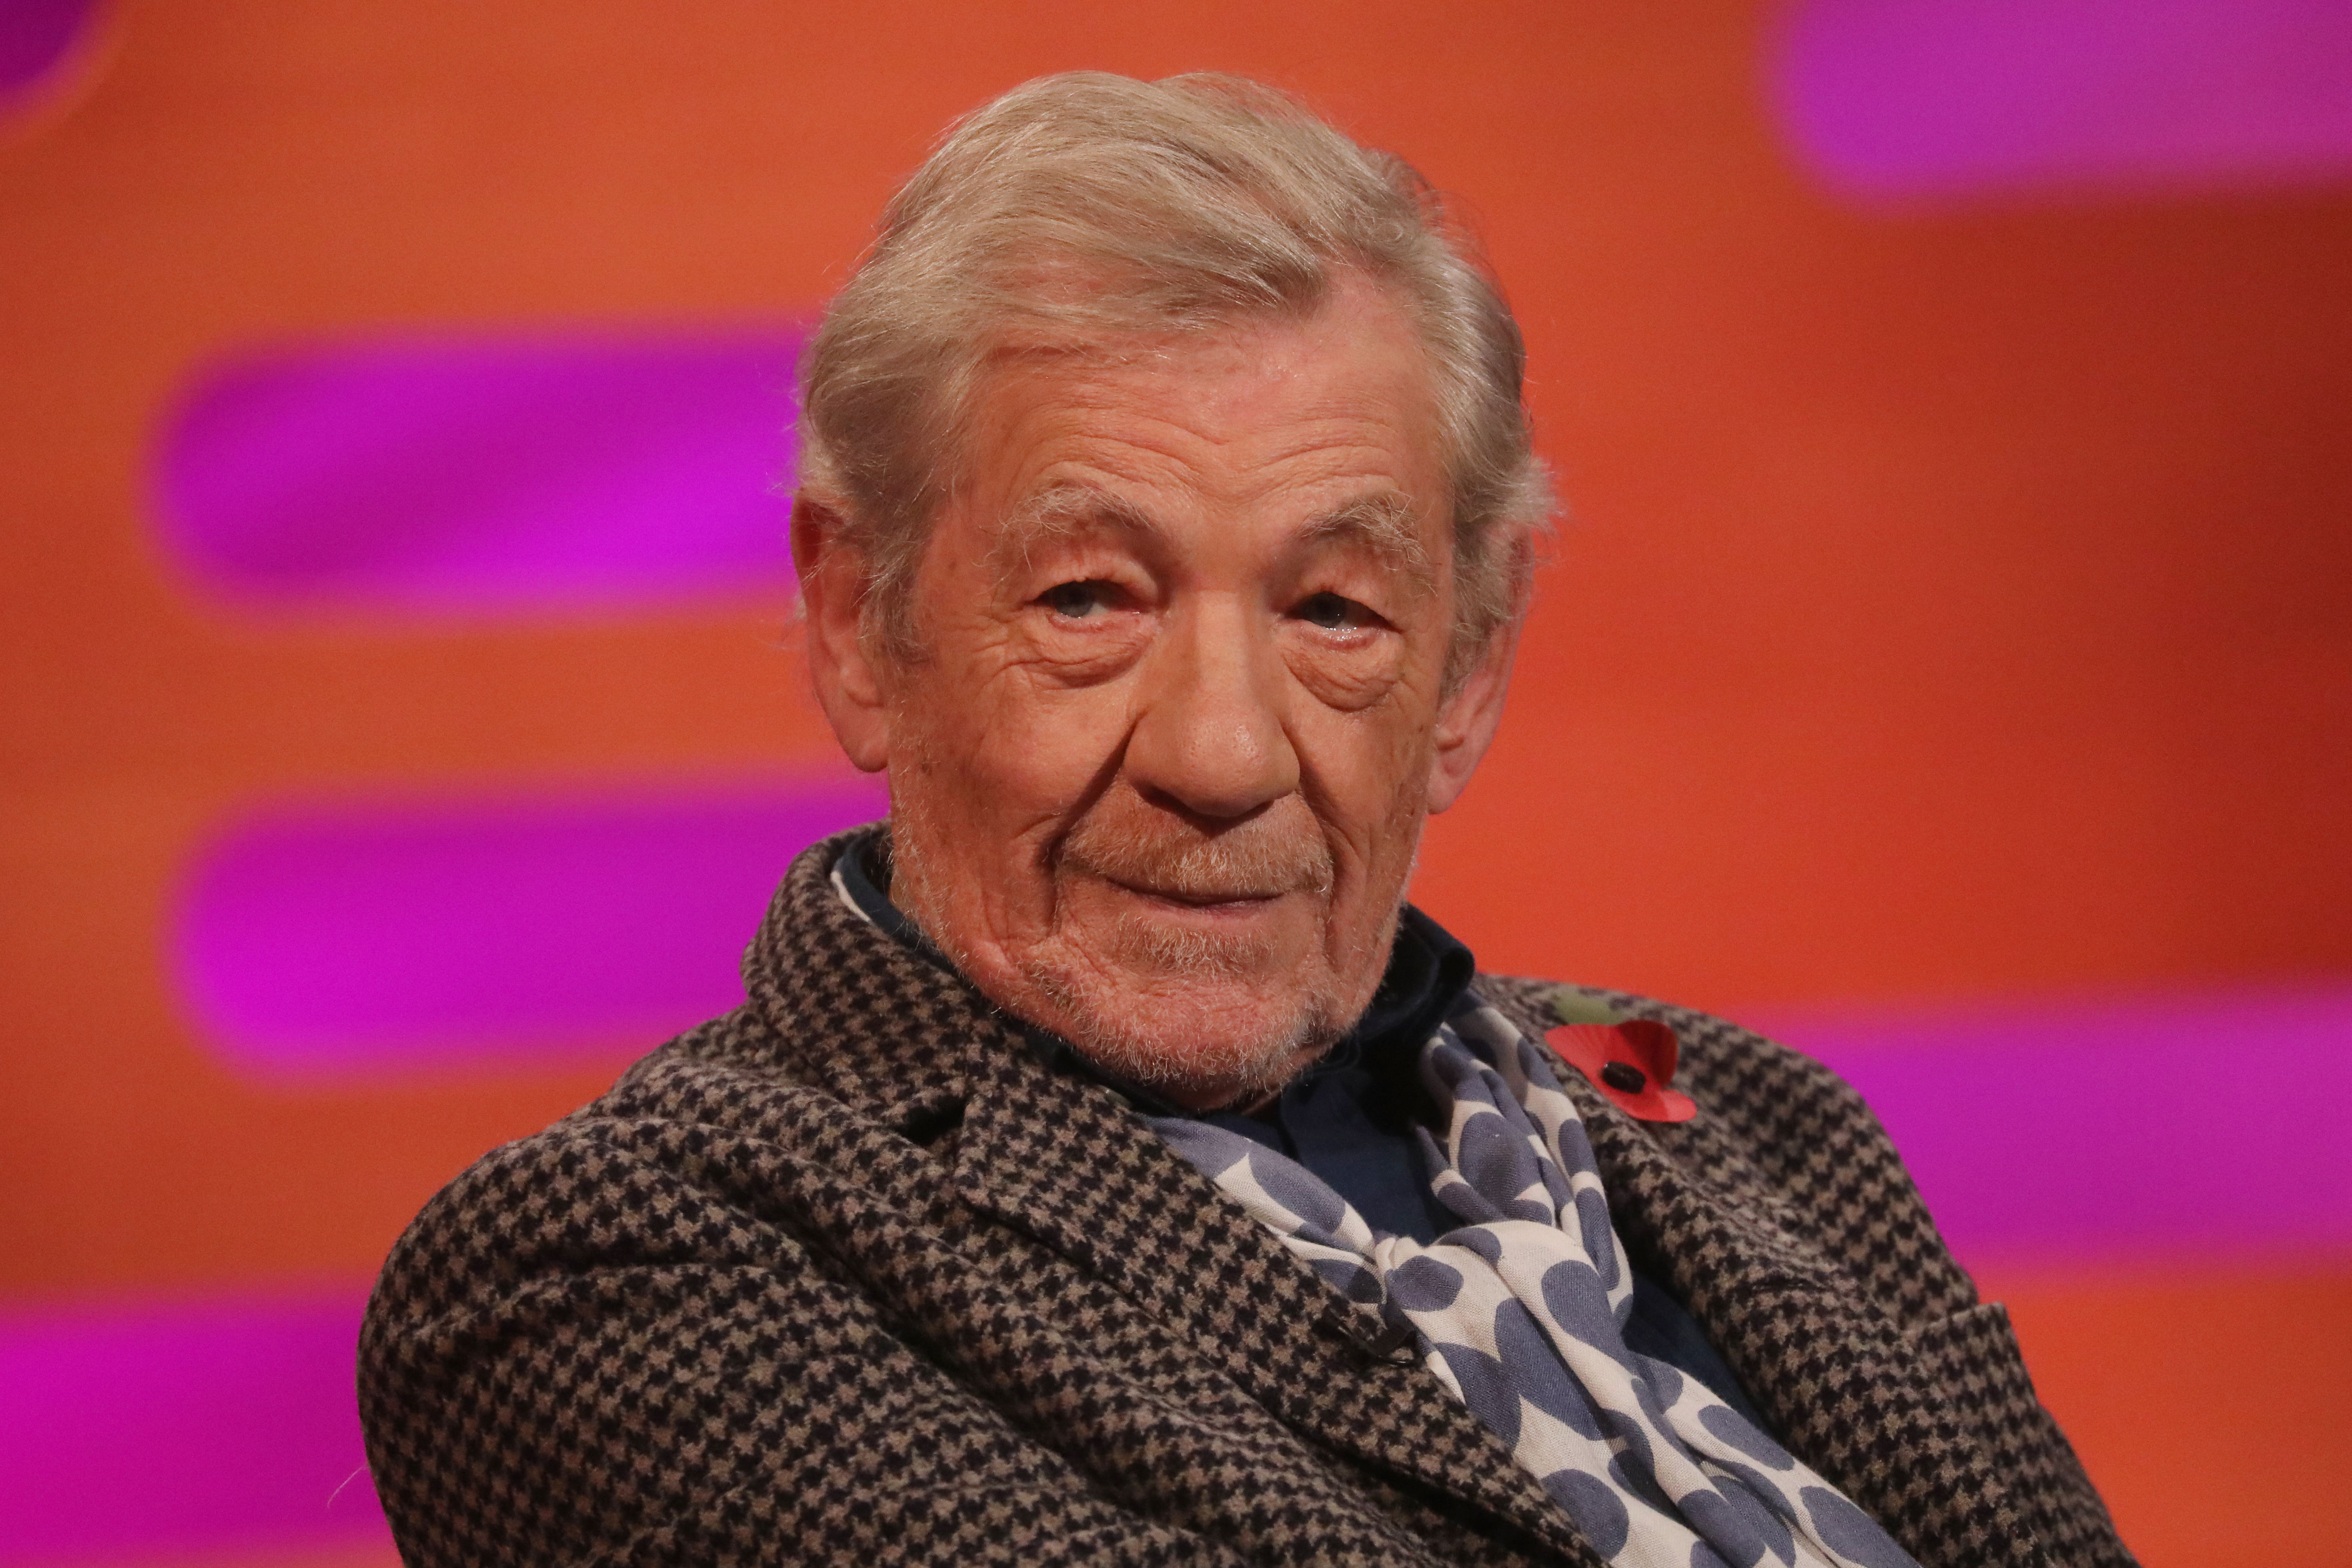 Sir Ian McKellen was taken to hospital after falling off stage